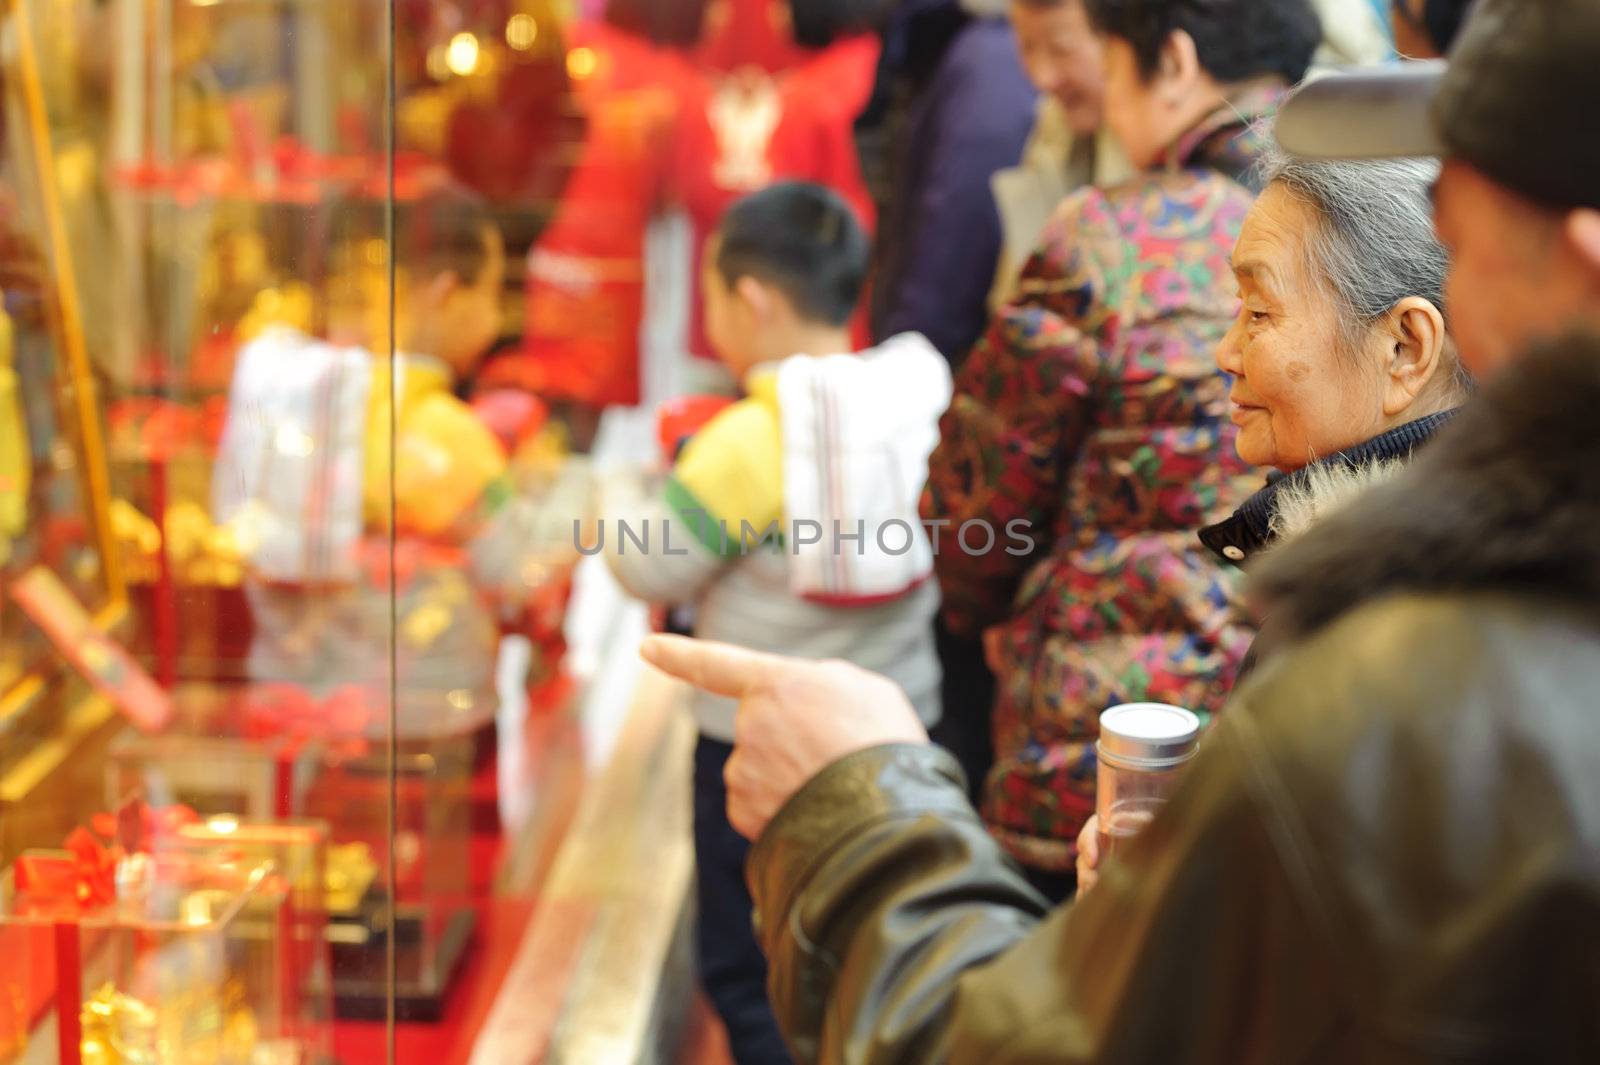 A Woman stop to look in the window of a gold shop on a busy pedestrian shopping street in downtown.